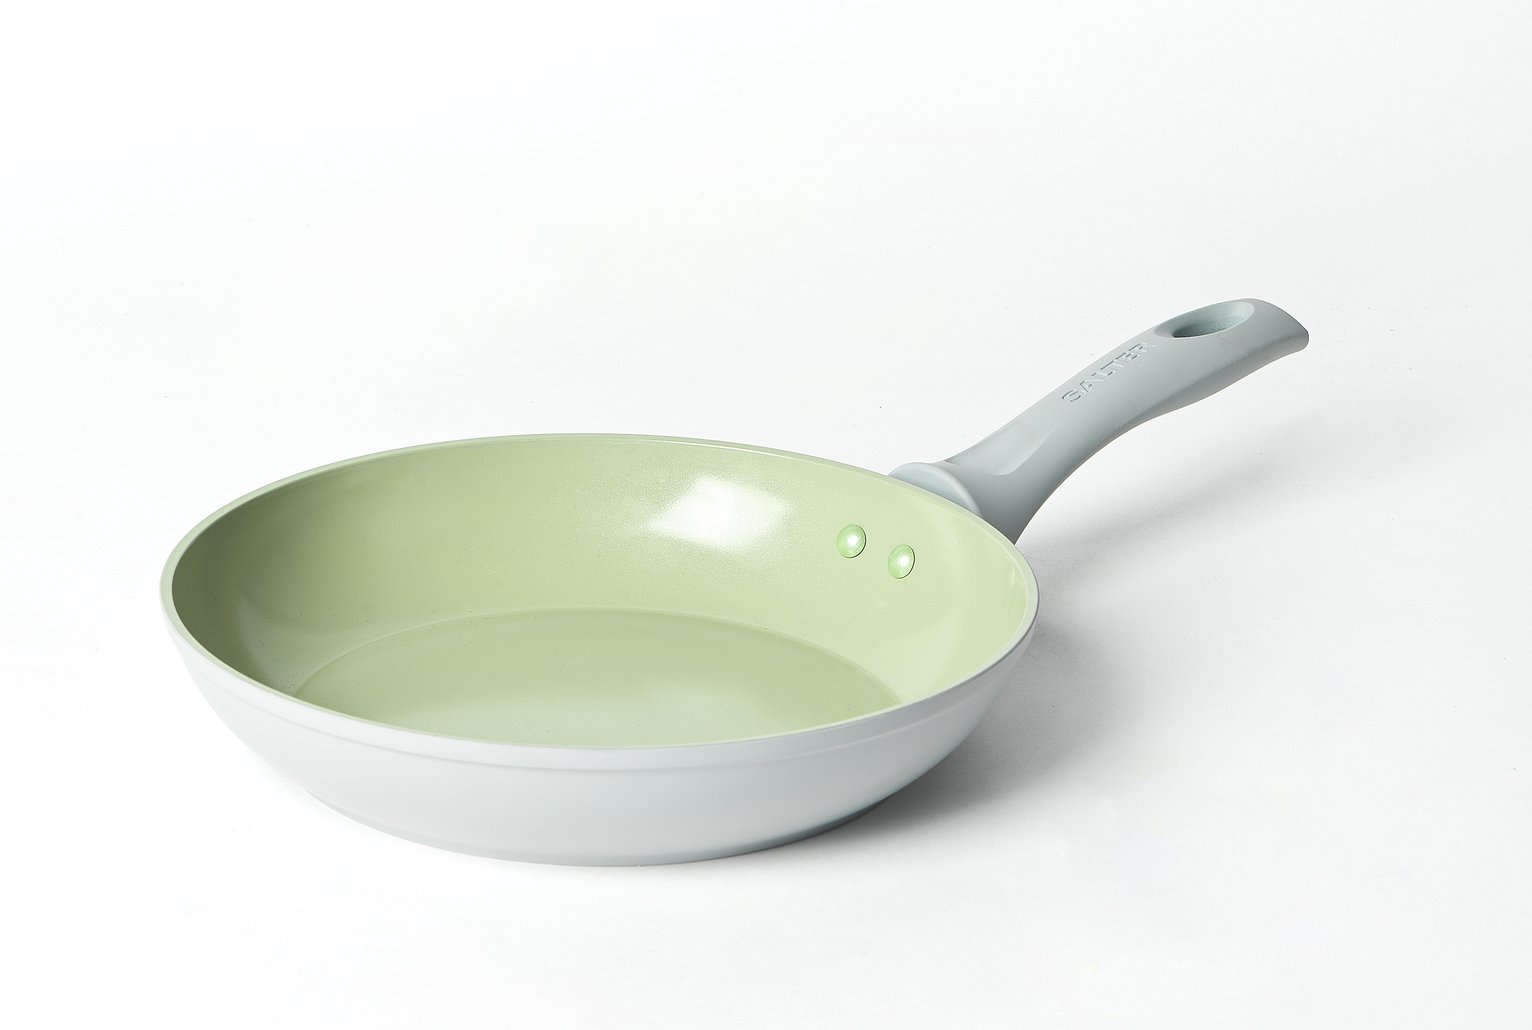 Salter Sustainable 28cm Frying Pan